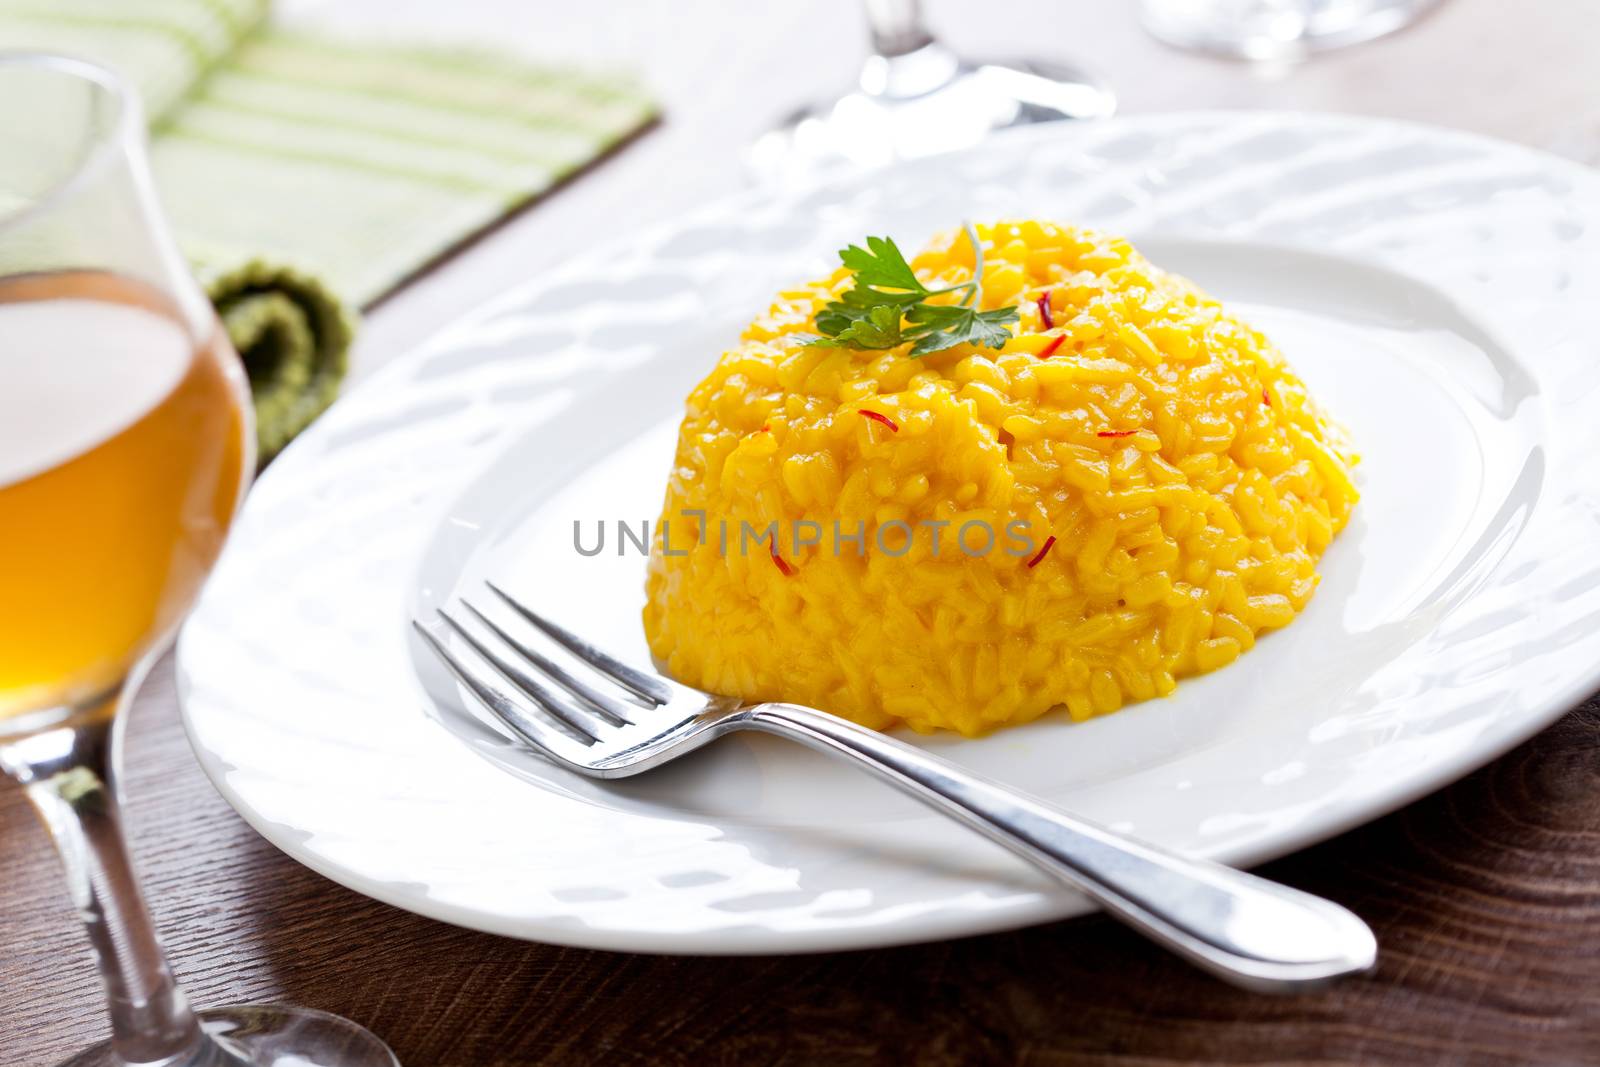 Homemade Saffron Risotto With A Glass Of Wine by mpessaris